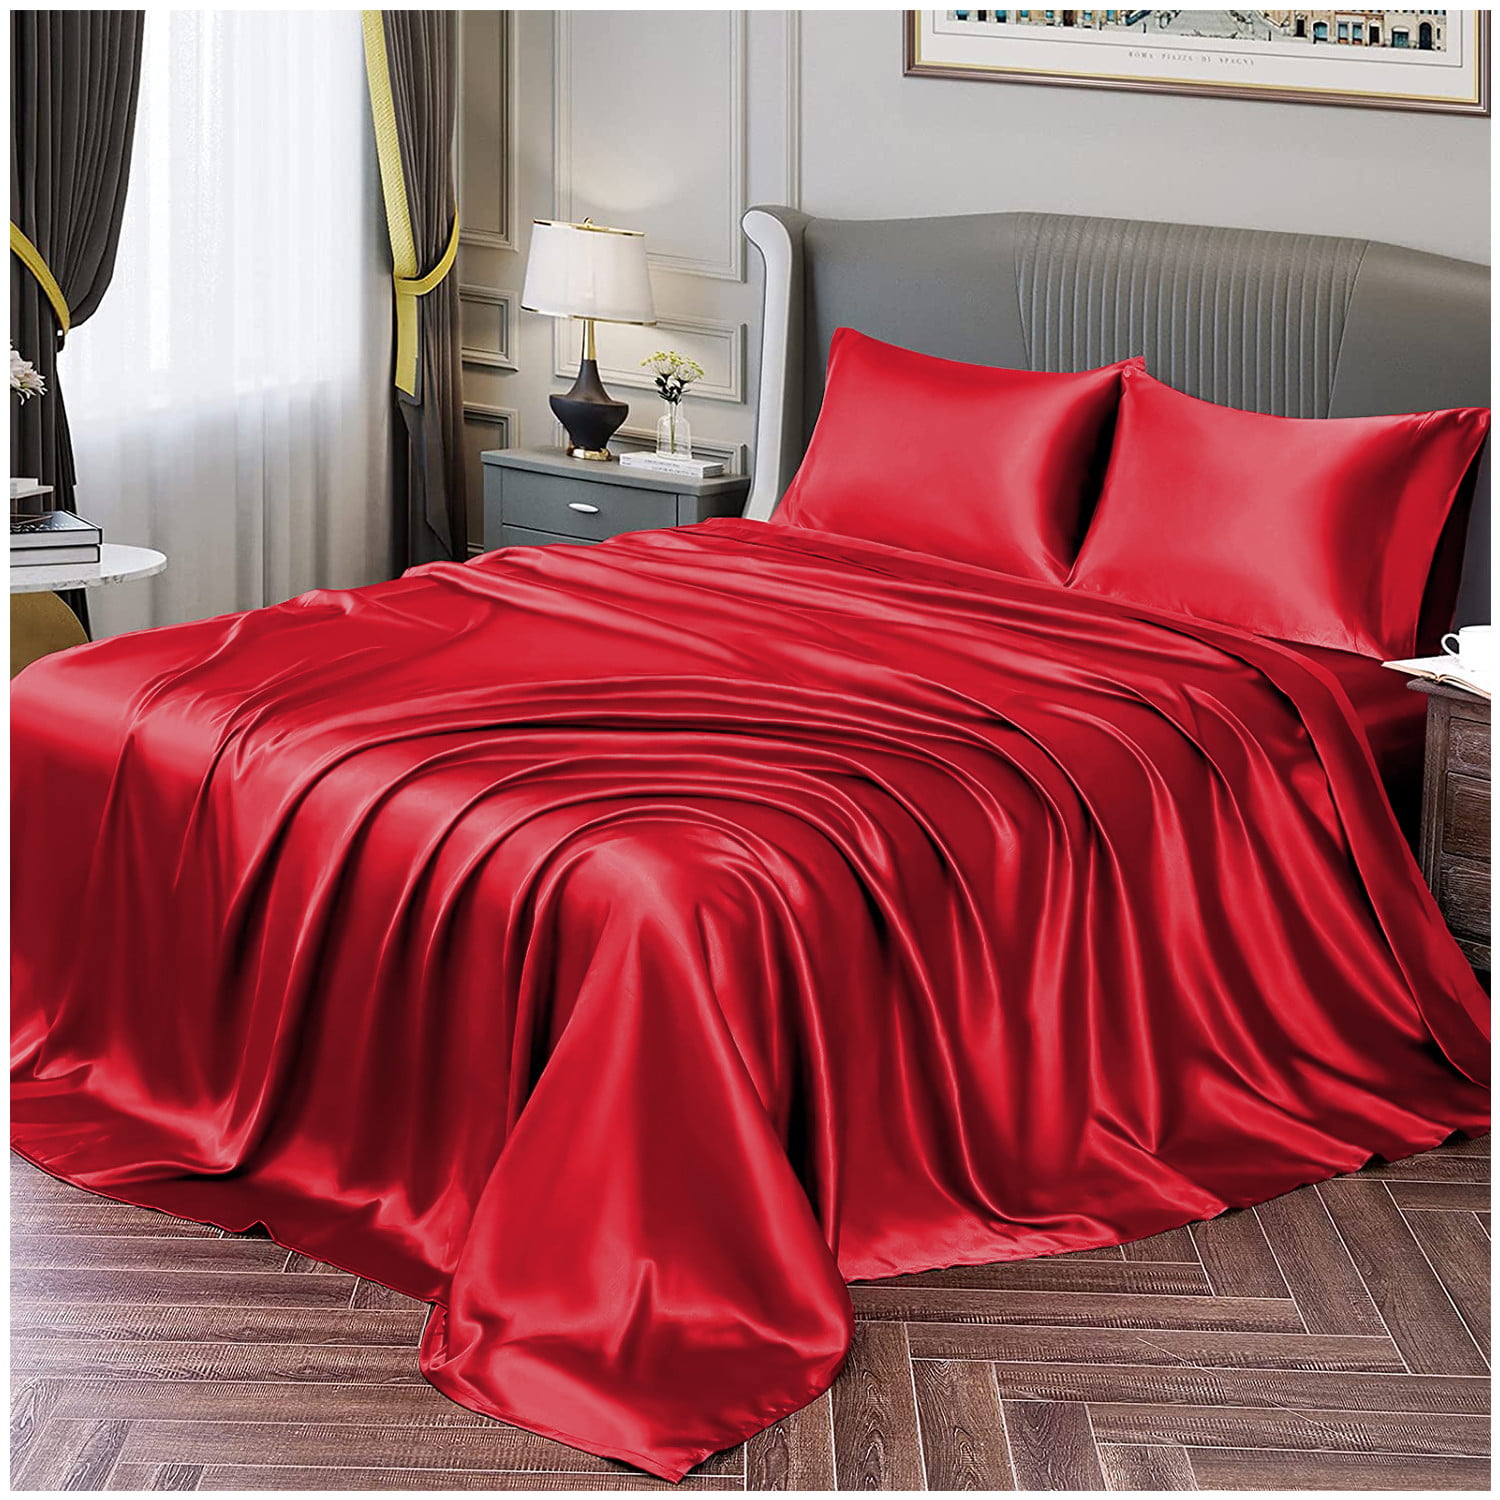 Matching Bedrooms Luxury Satin Black Double Bedding Set Includes Duvet Cover Fitted Sheet and 4 Pillowcases